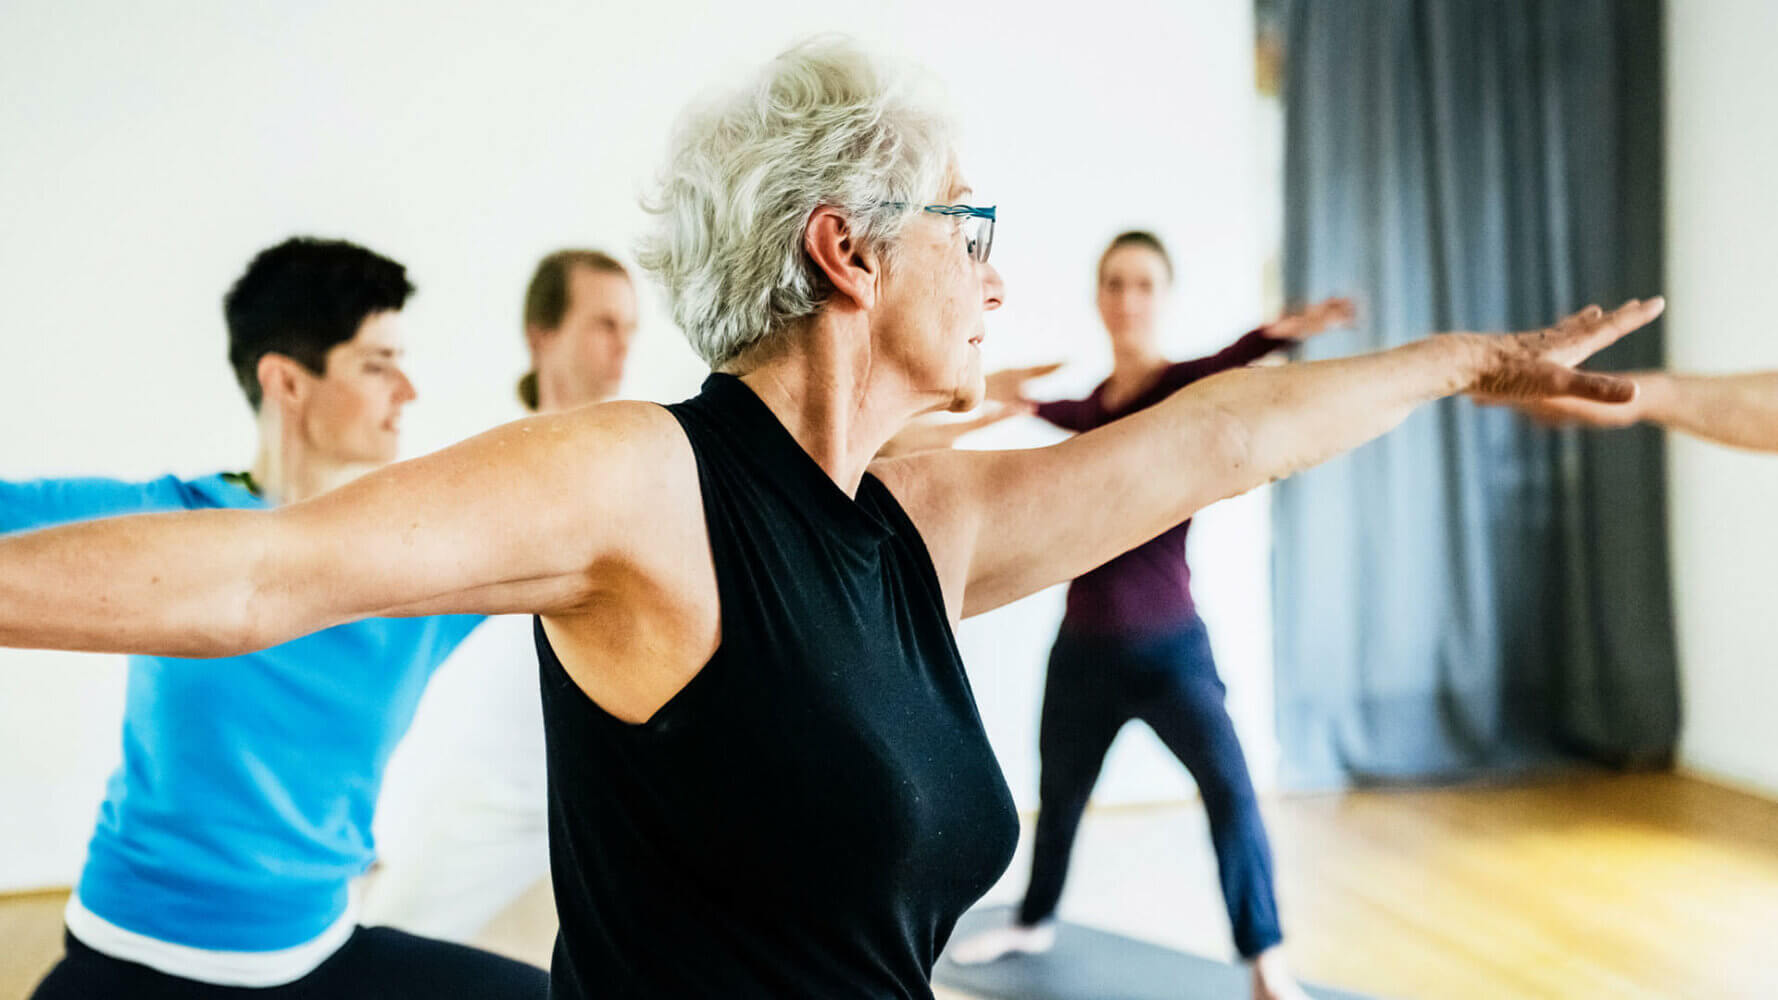 A woman leads a yoga class, helping clients is crucial